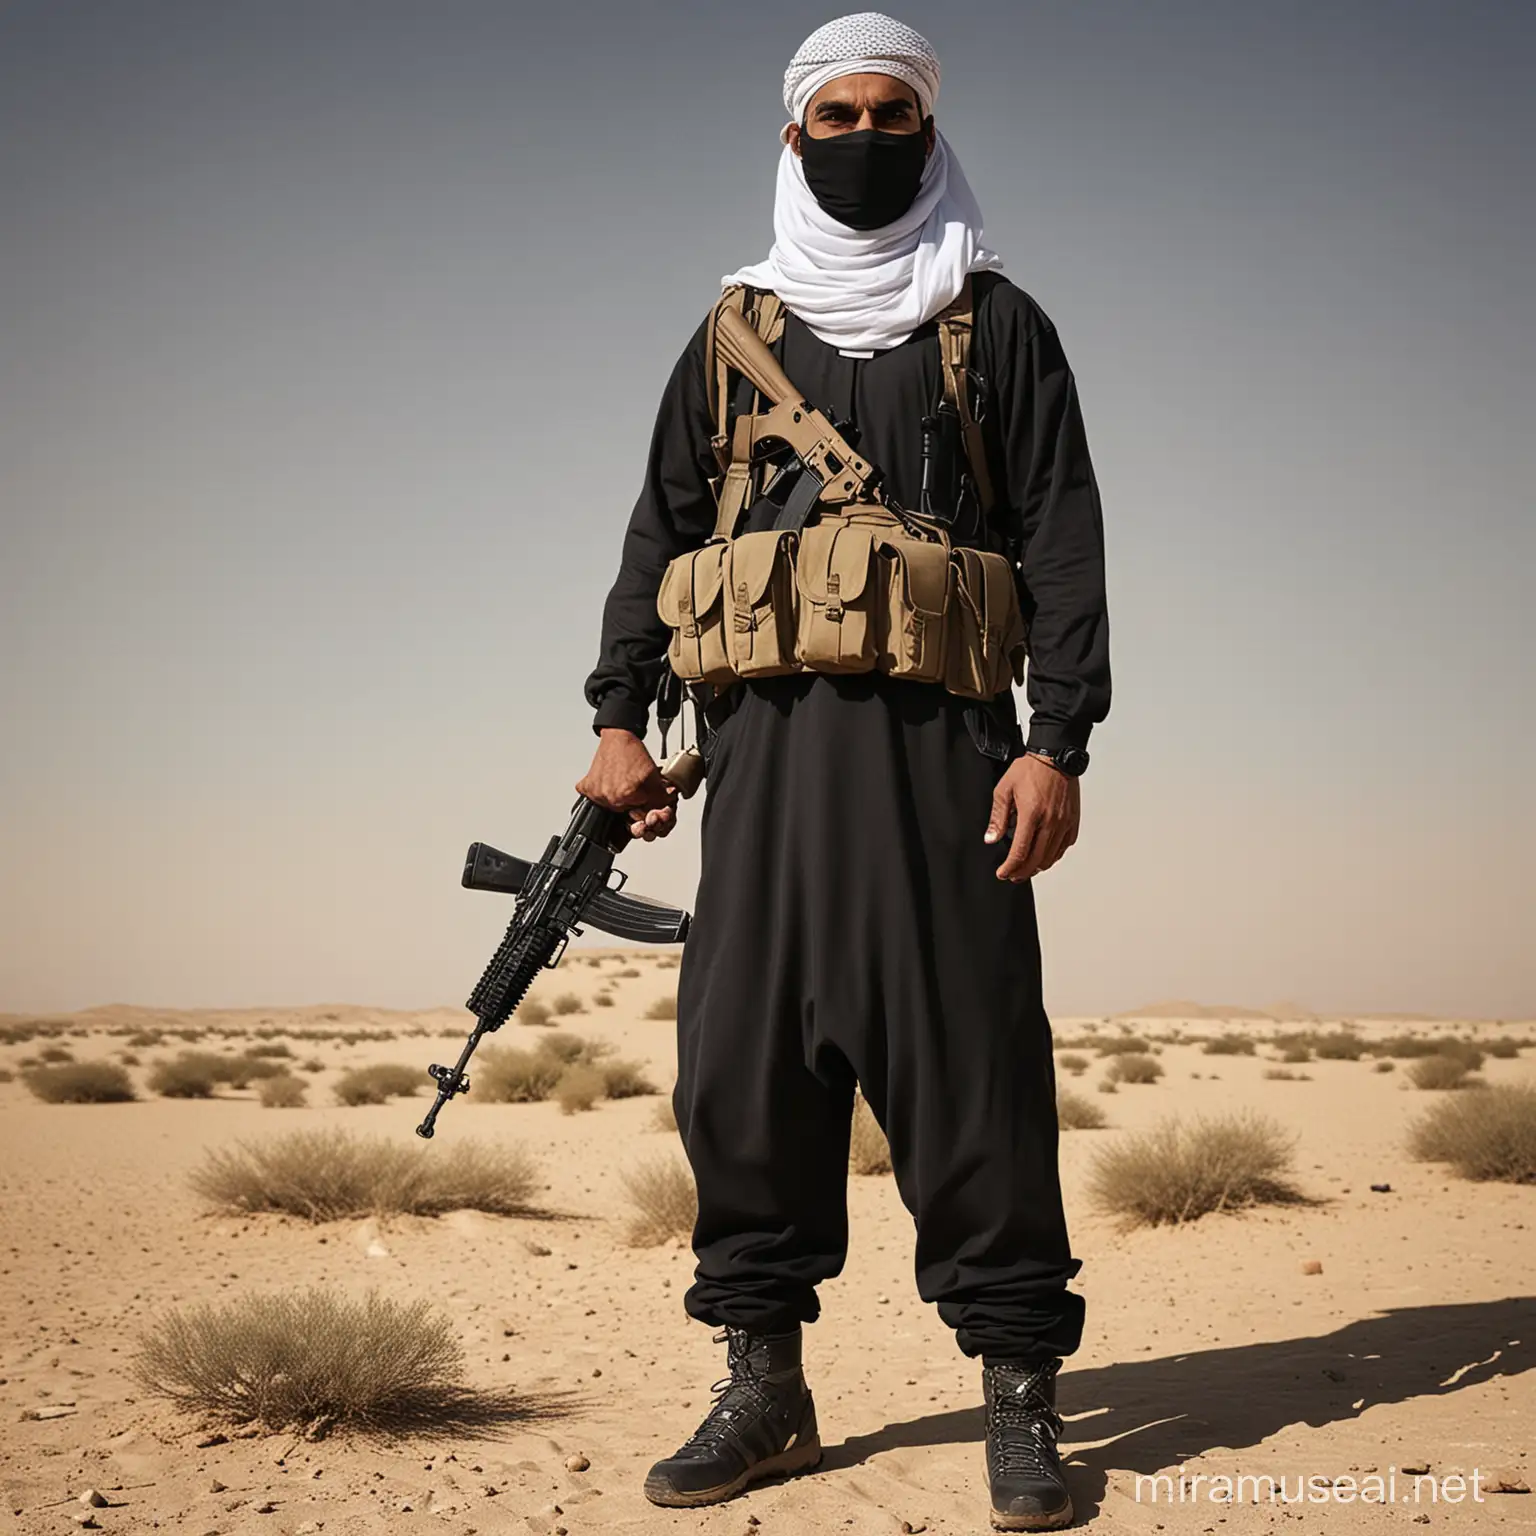 Muslim Terrorist in Traditional Clothing with Explosive Device